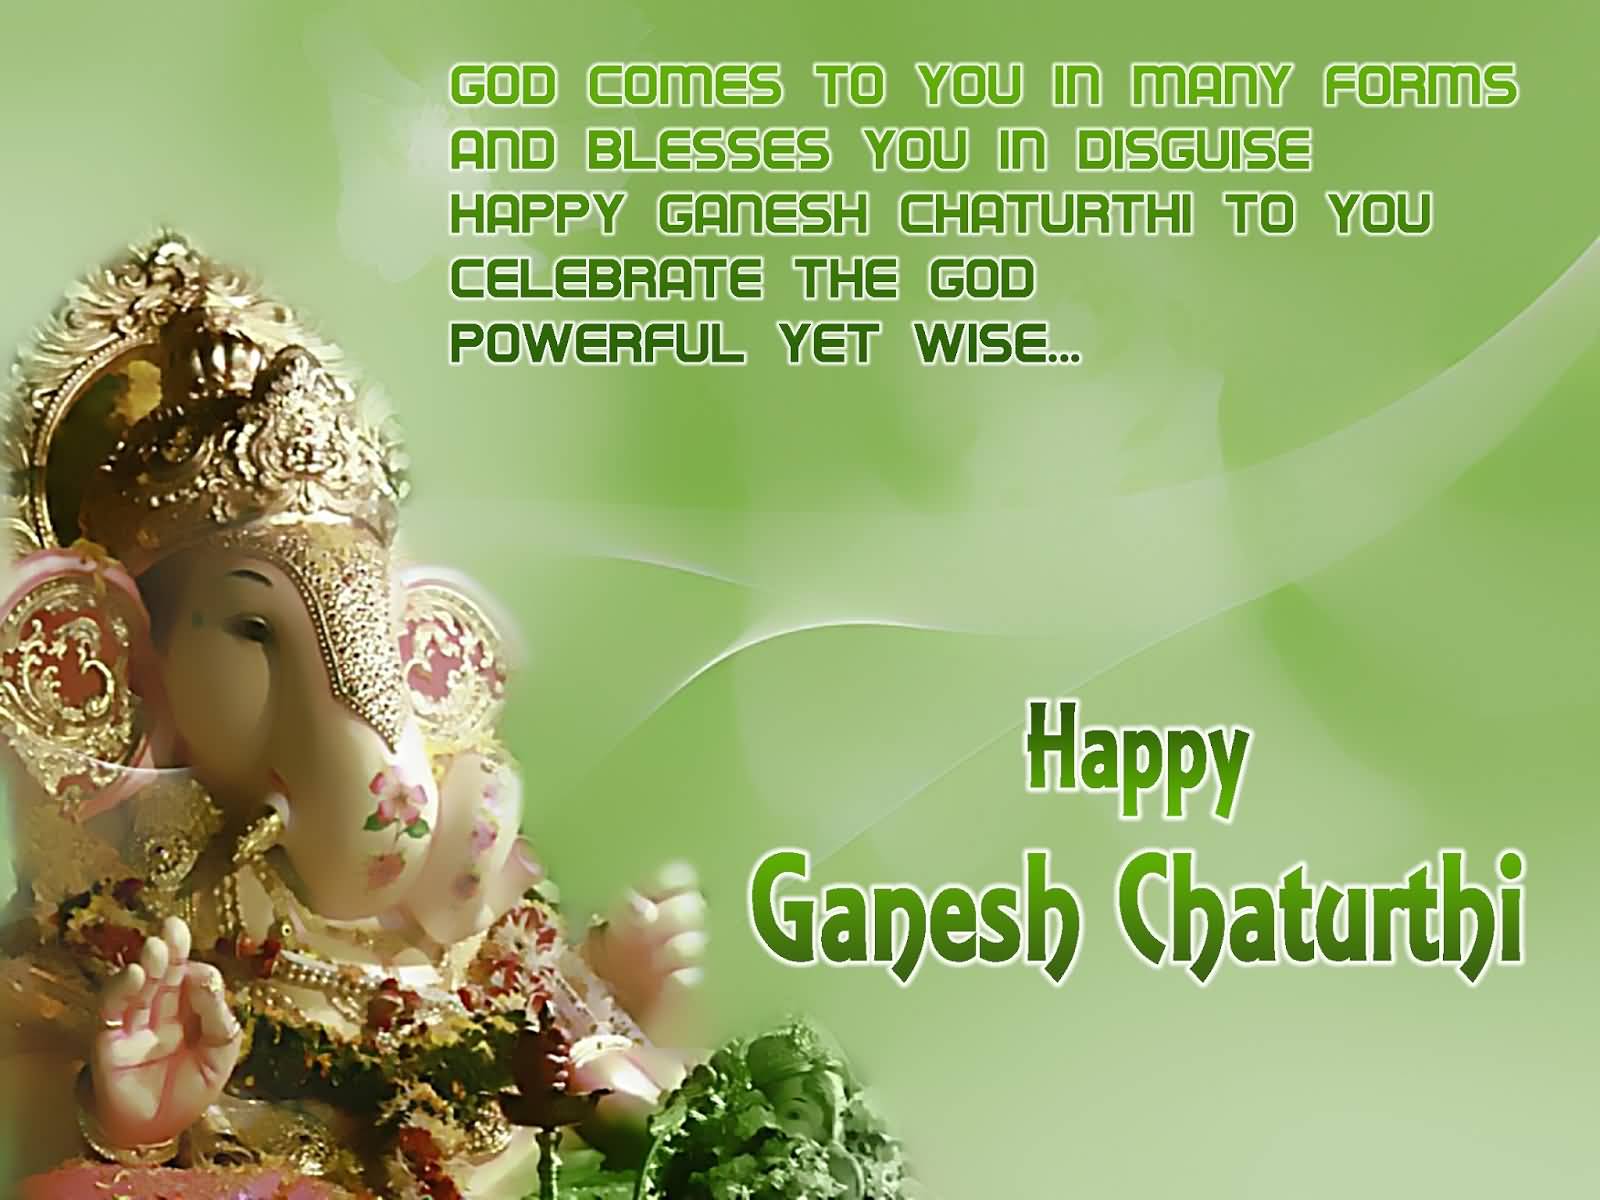 God Comes To You In Many Forms And Blesses You In Disguise Happy Ganesh Chaturthi Greeting Card